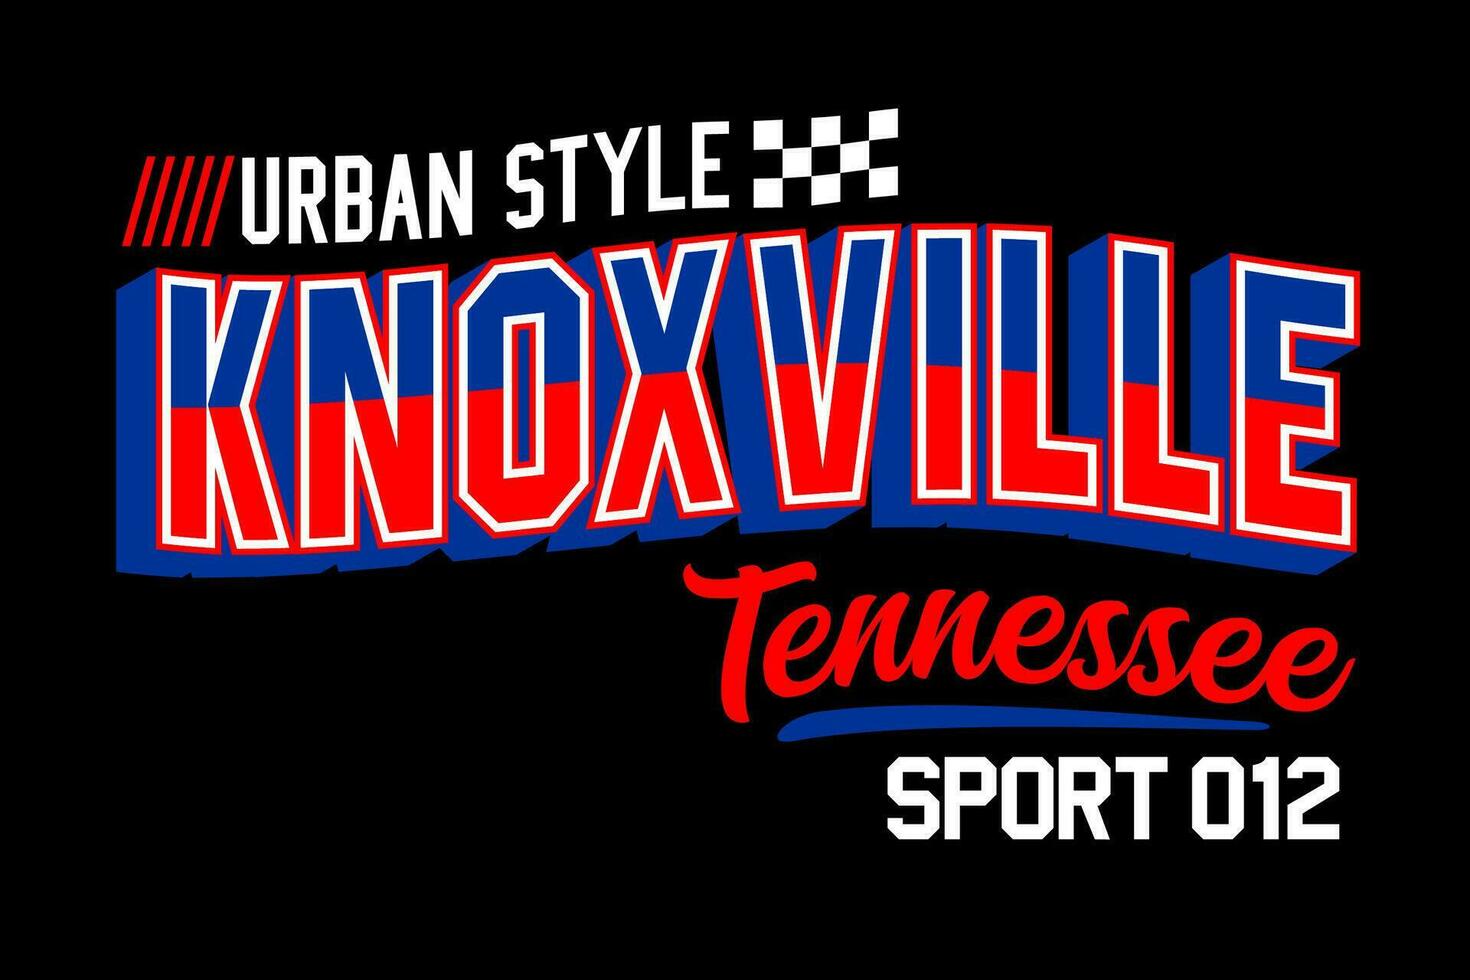 Knoxville Tennessee vintage college, for print on t shirts etc. vector